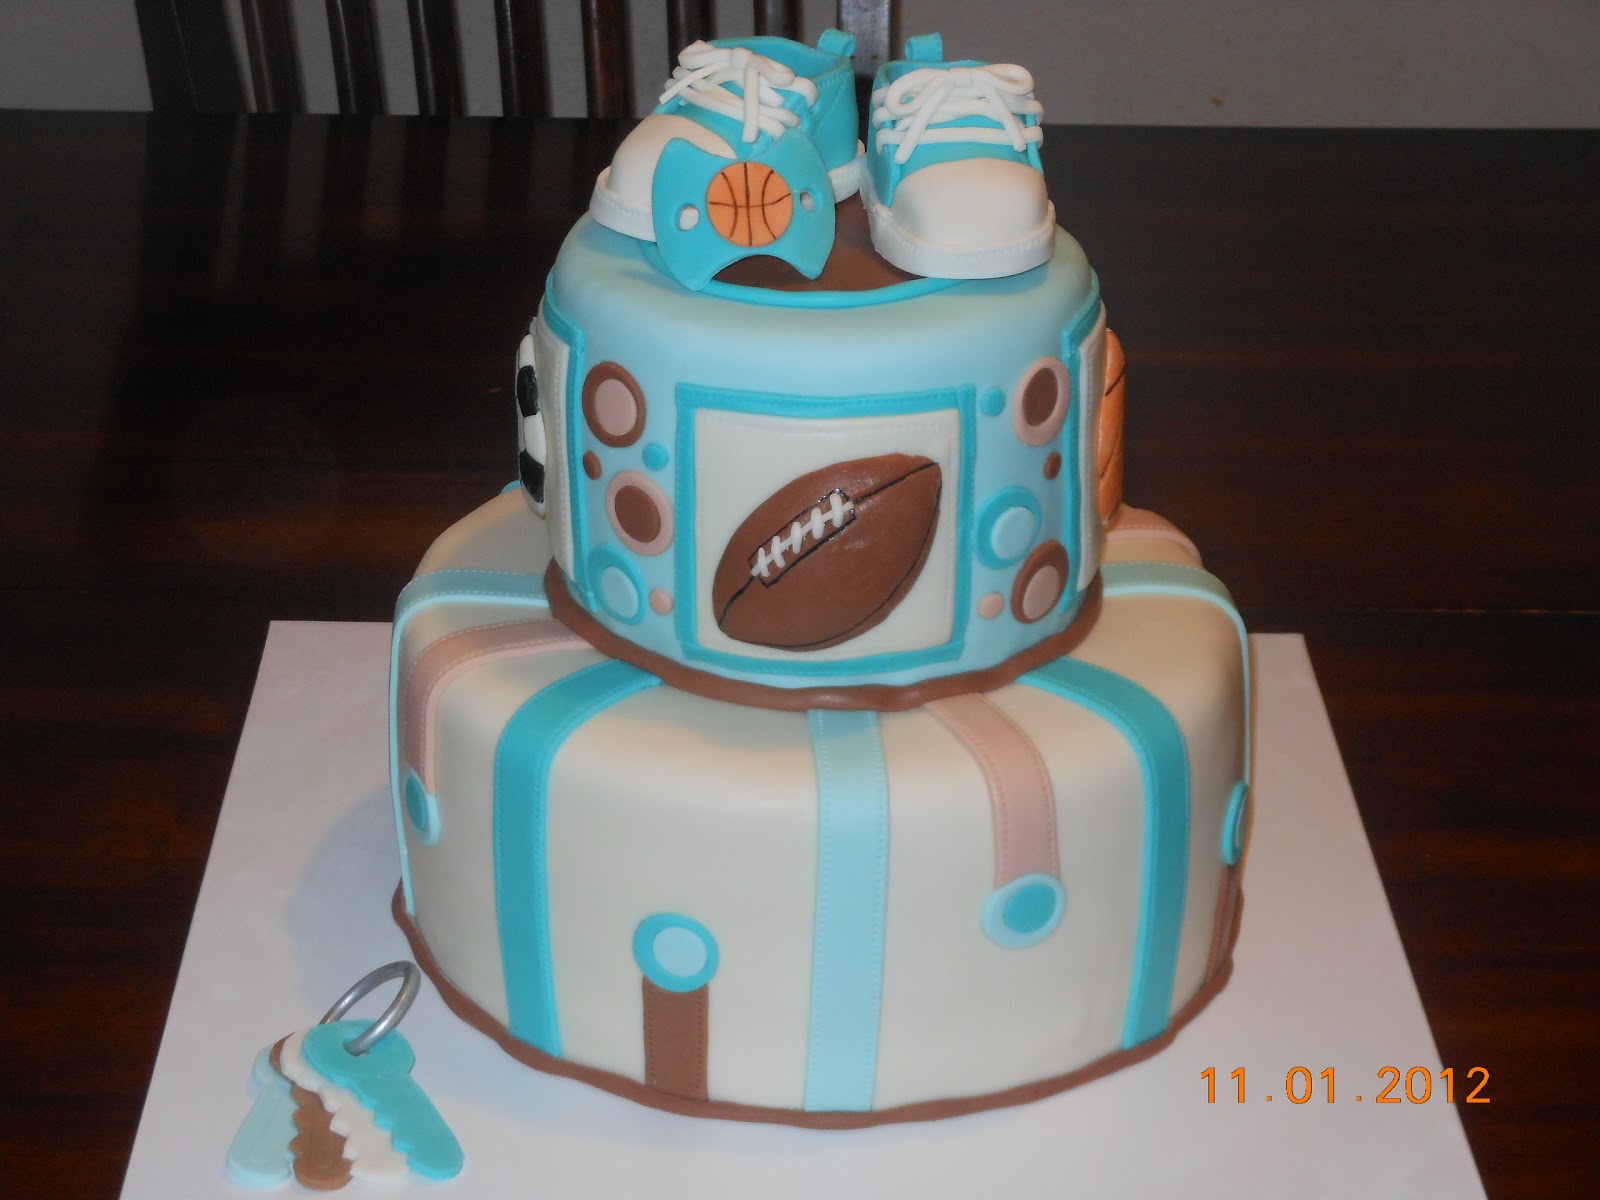 And Here's the back. (I like to see the backs of cakes when they are ...